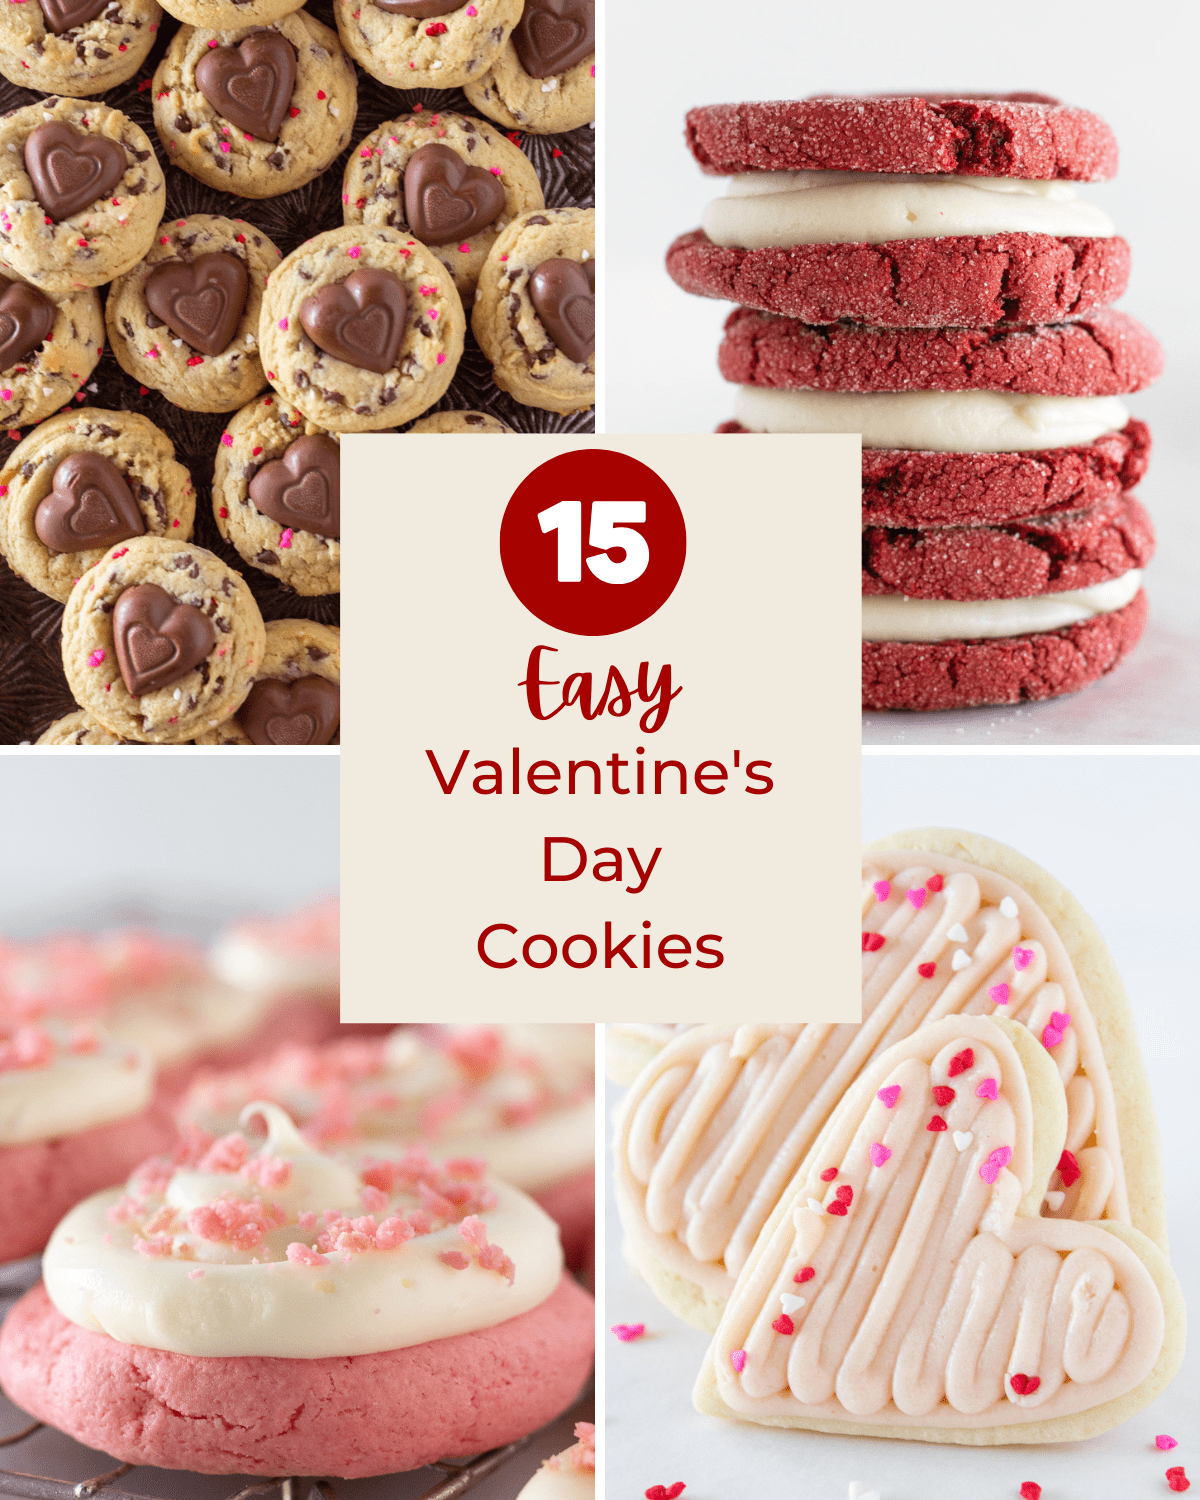 Collage of 4 cookies that are Easy Valentine's Day recipes.